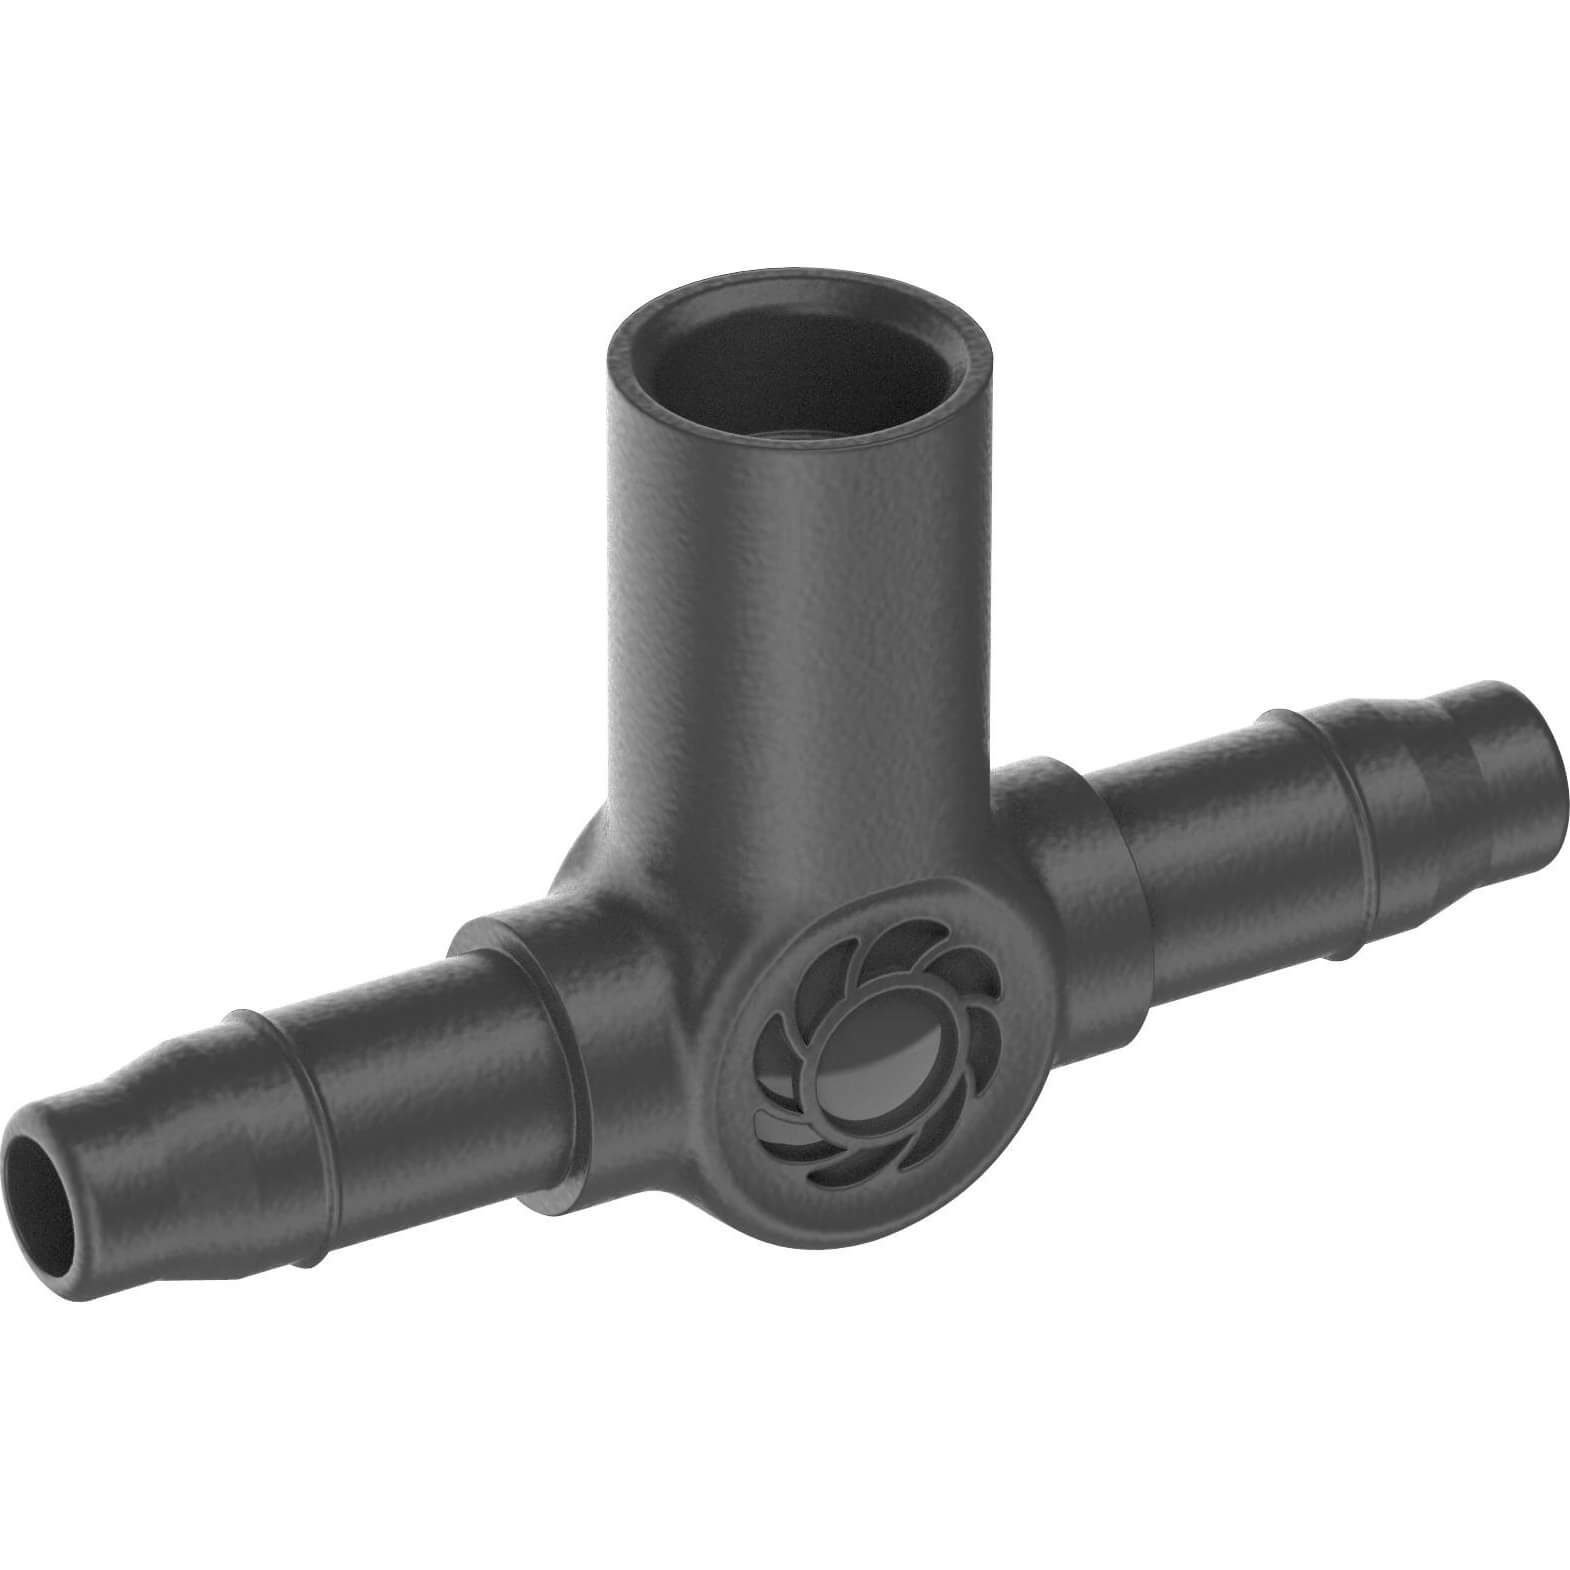 Image of Gardena MICRO DRIP T Joint Connector for Spray Nozzles (New) 3/16" / 4.6mm Pack of 5